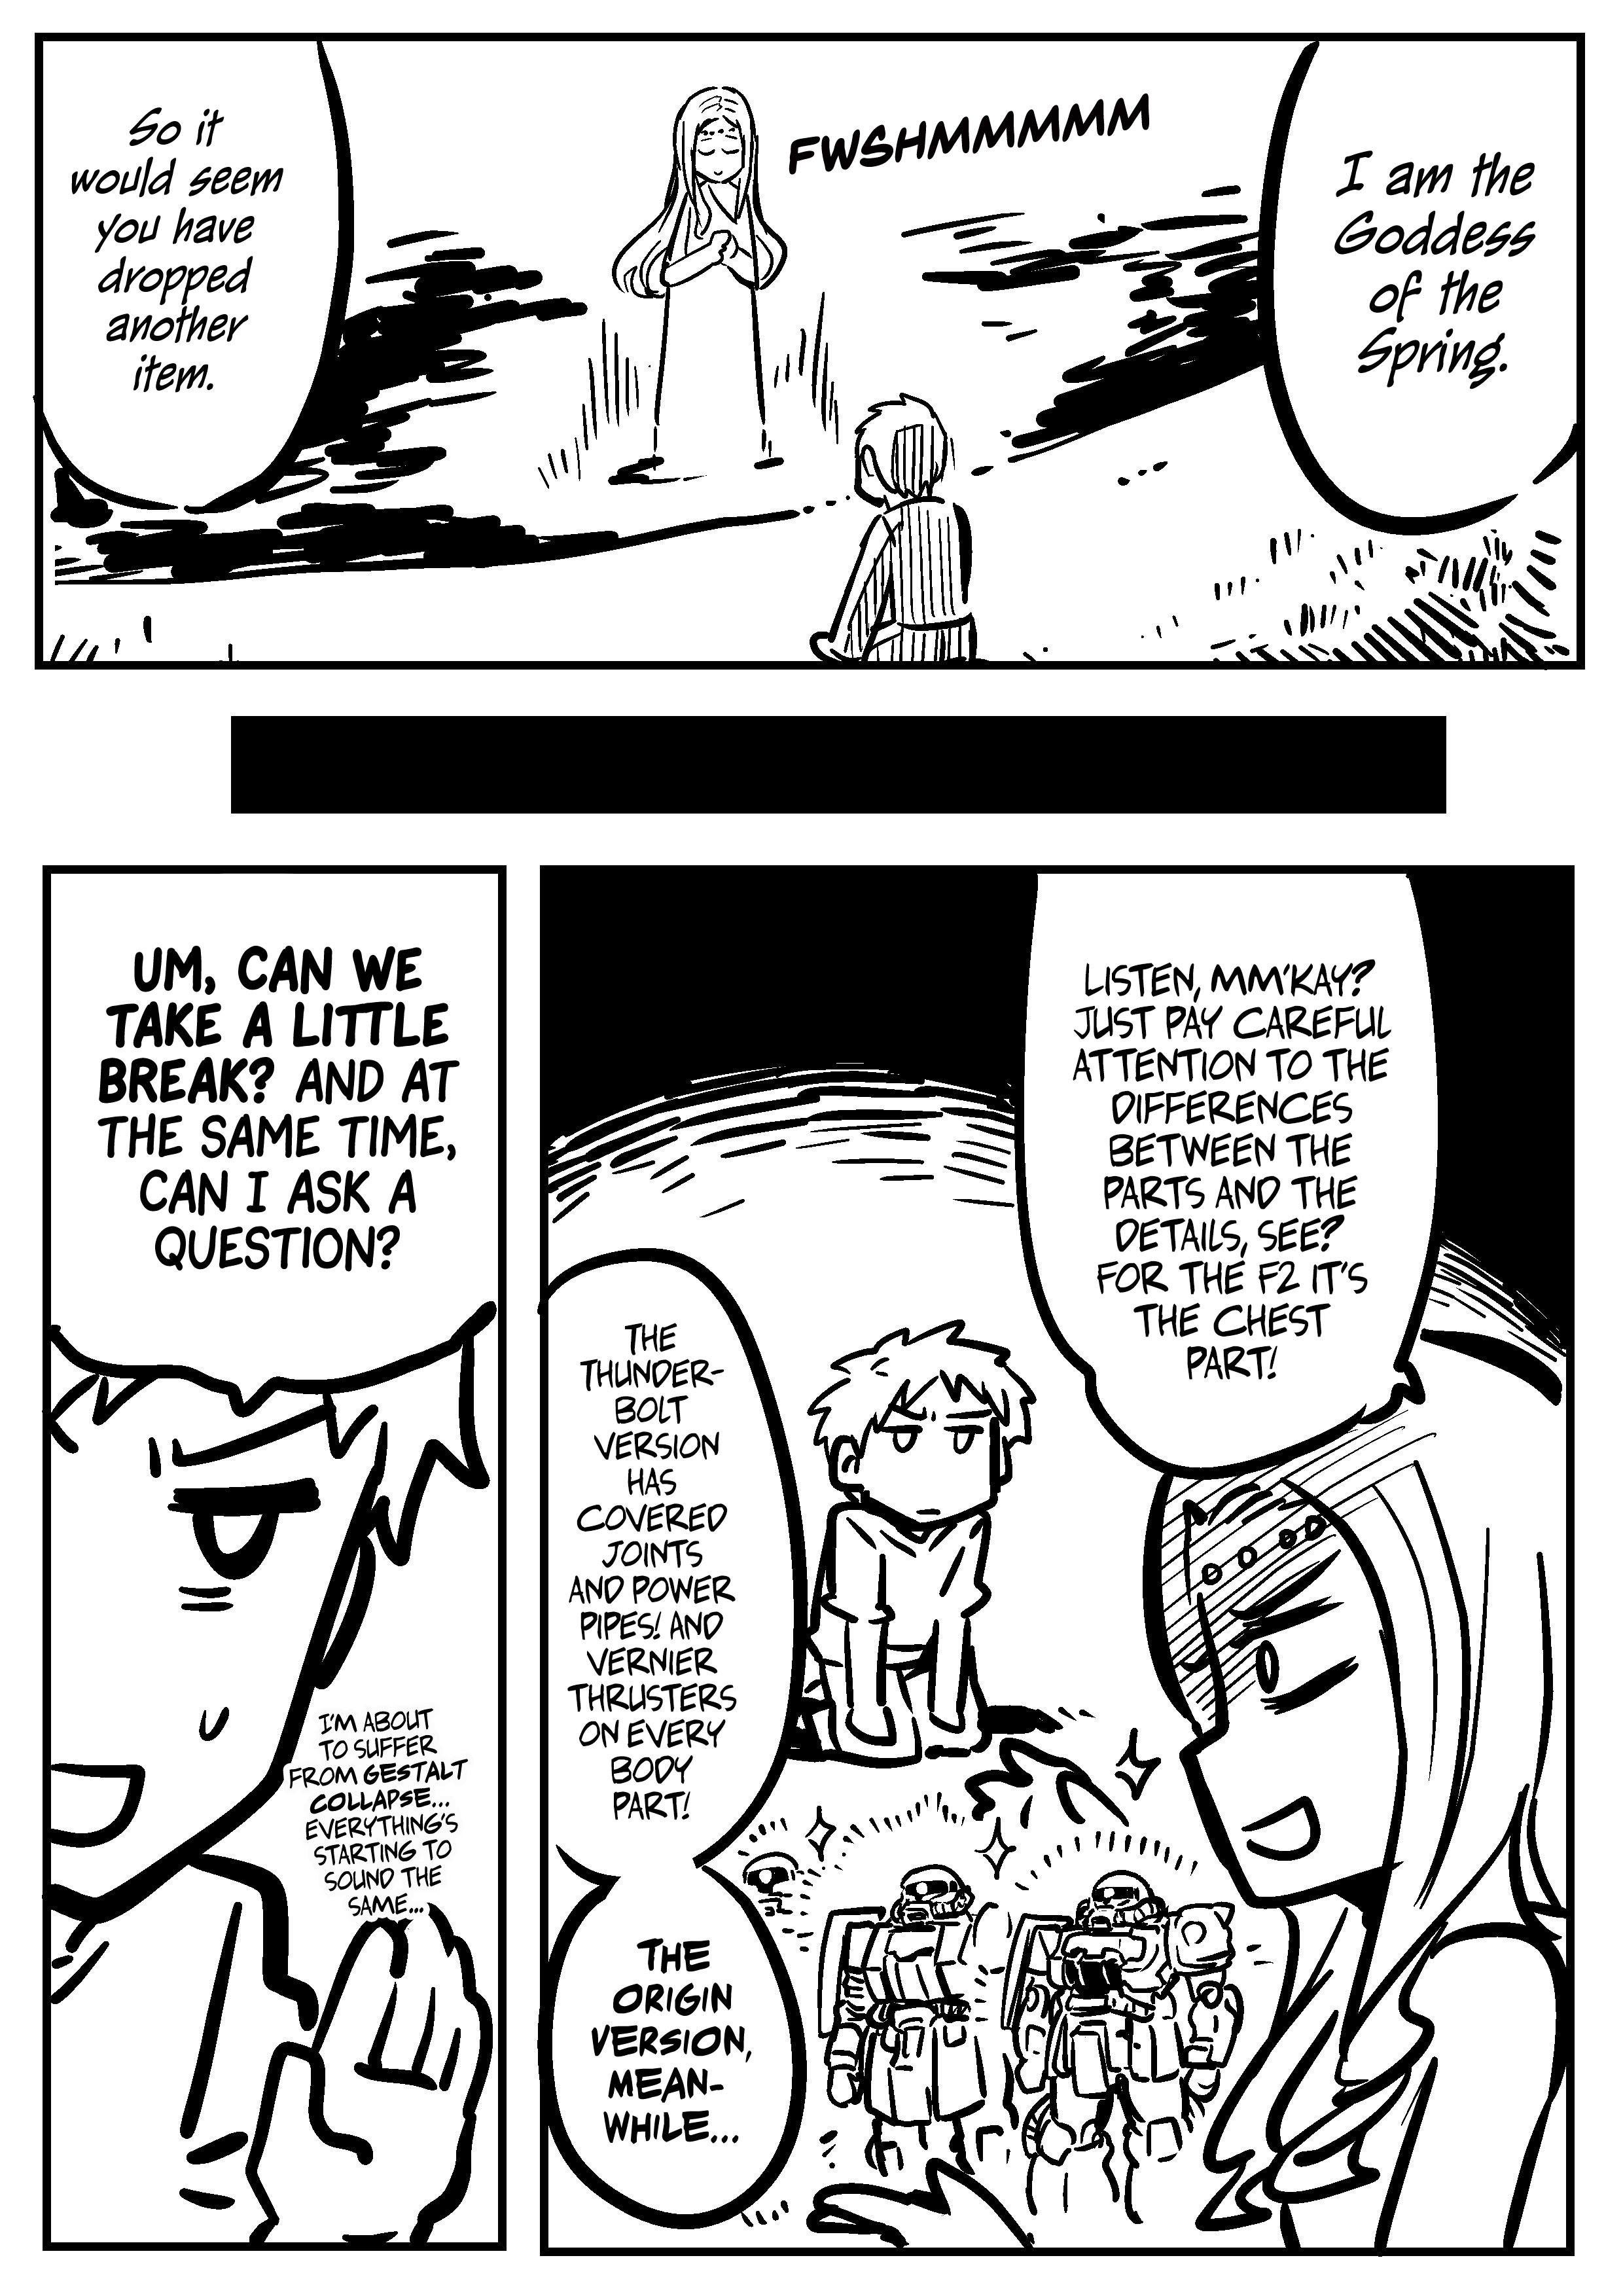 Goddess Of The G-Spring - Page 1